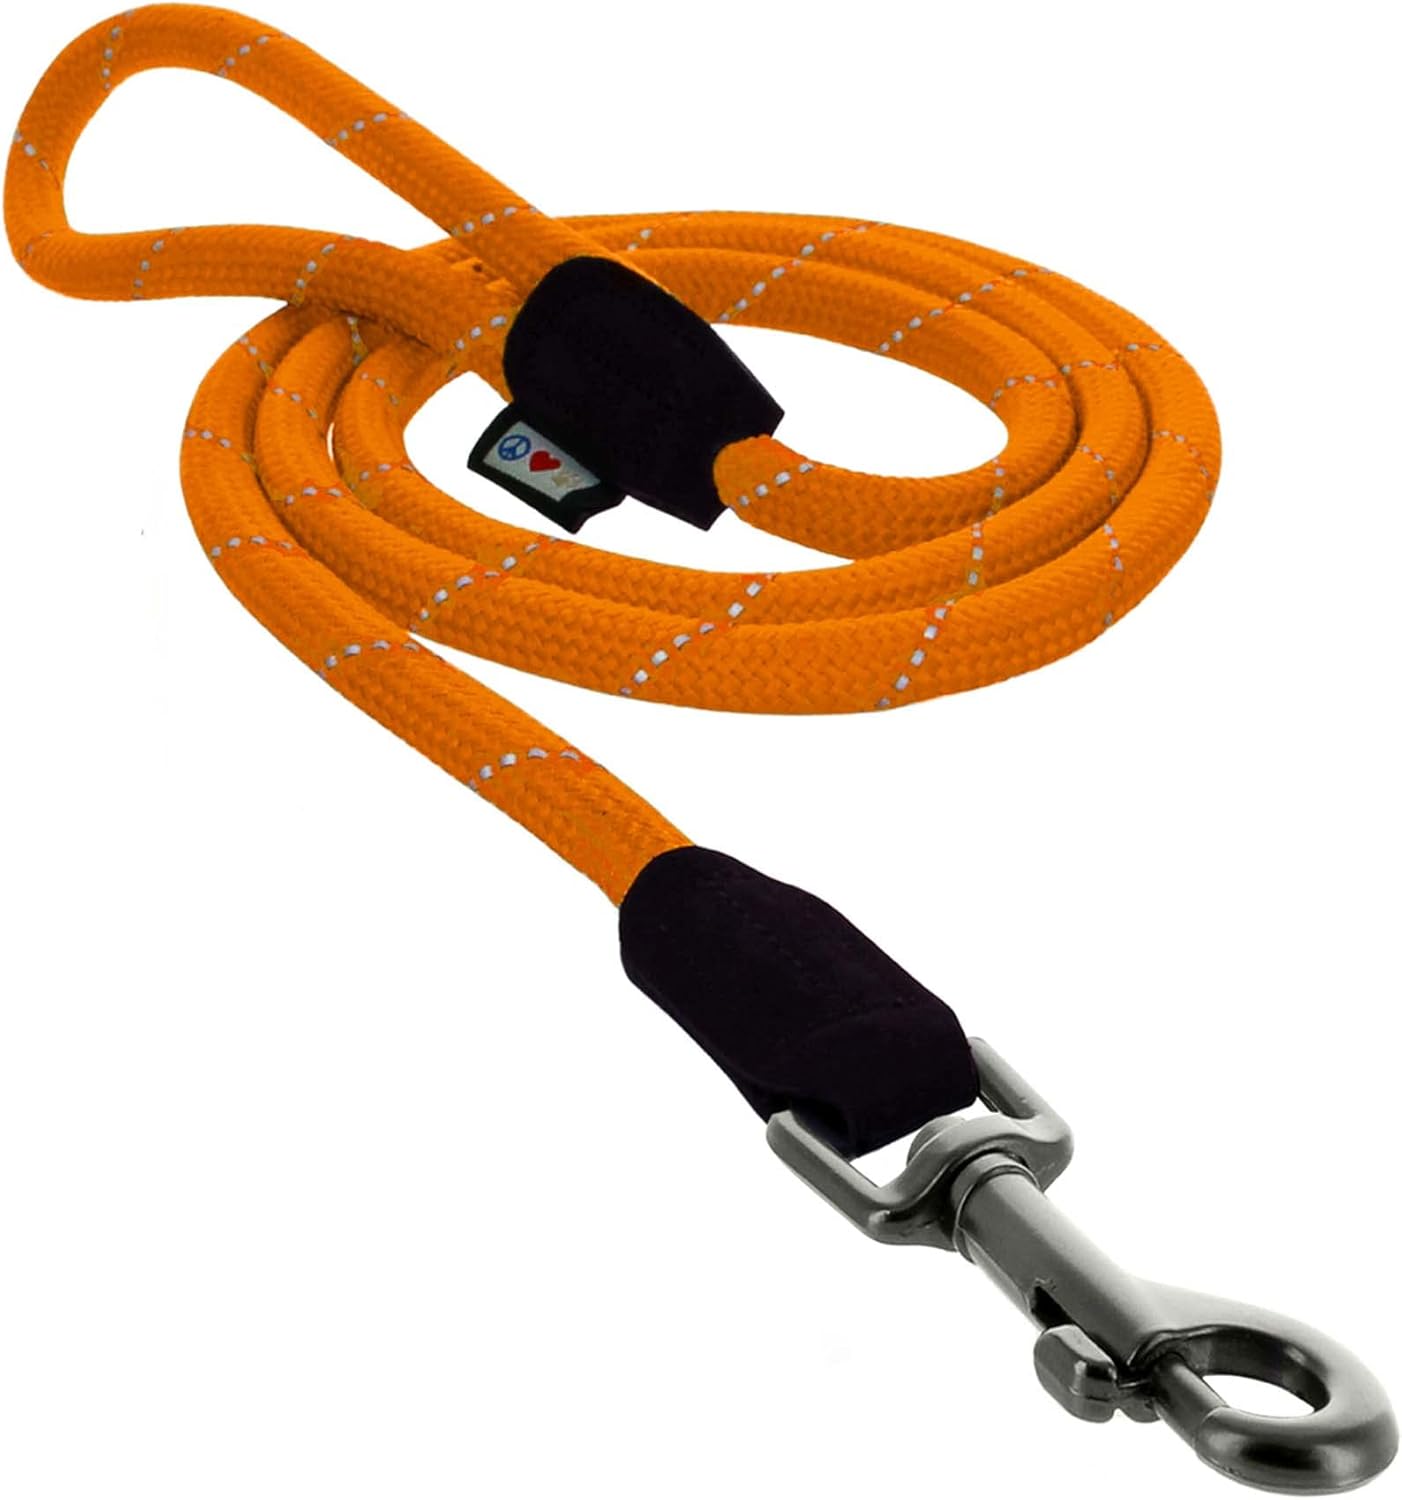 PAWTITAS 1.8 M Training Dog Lead Durable Small Rope Lead for Dogs Premium Quality Heavy Duty Rope Lead Strong and Comfortable - Orange Puppy Lead